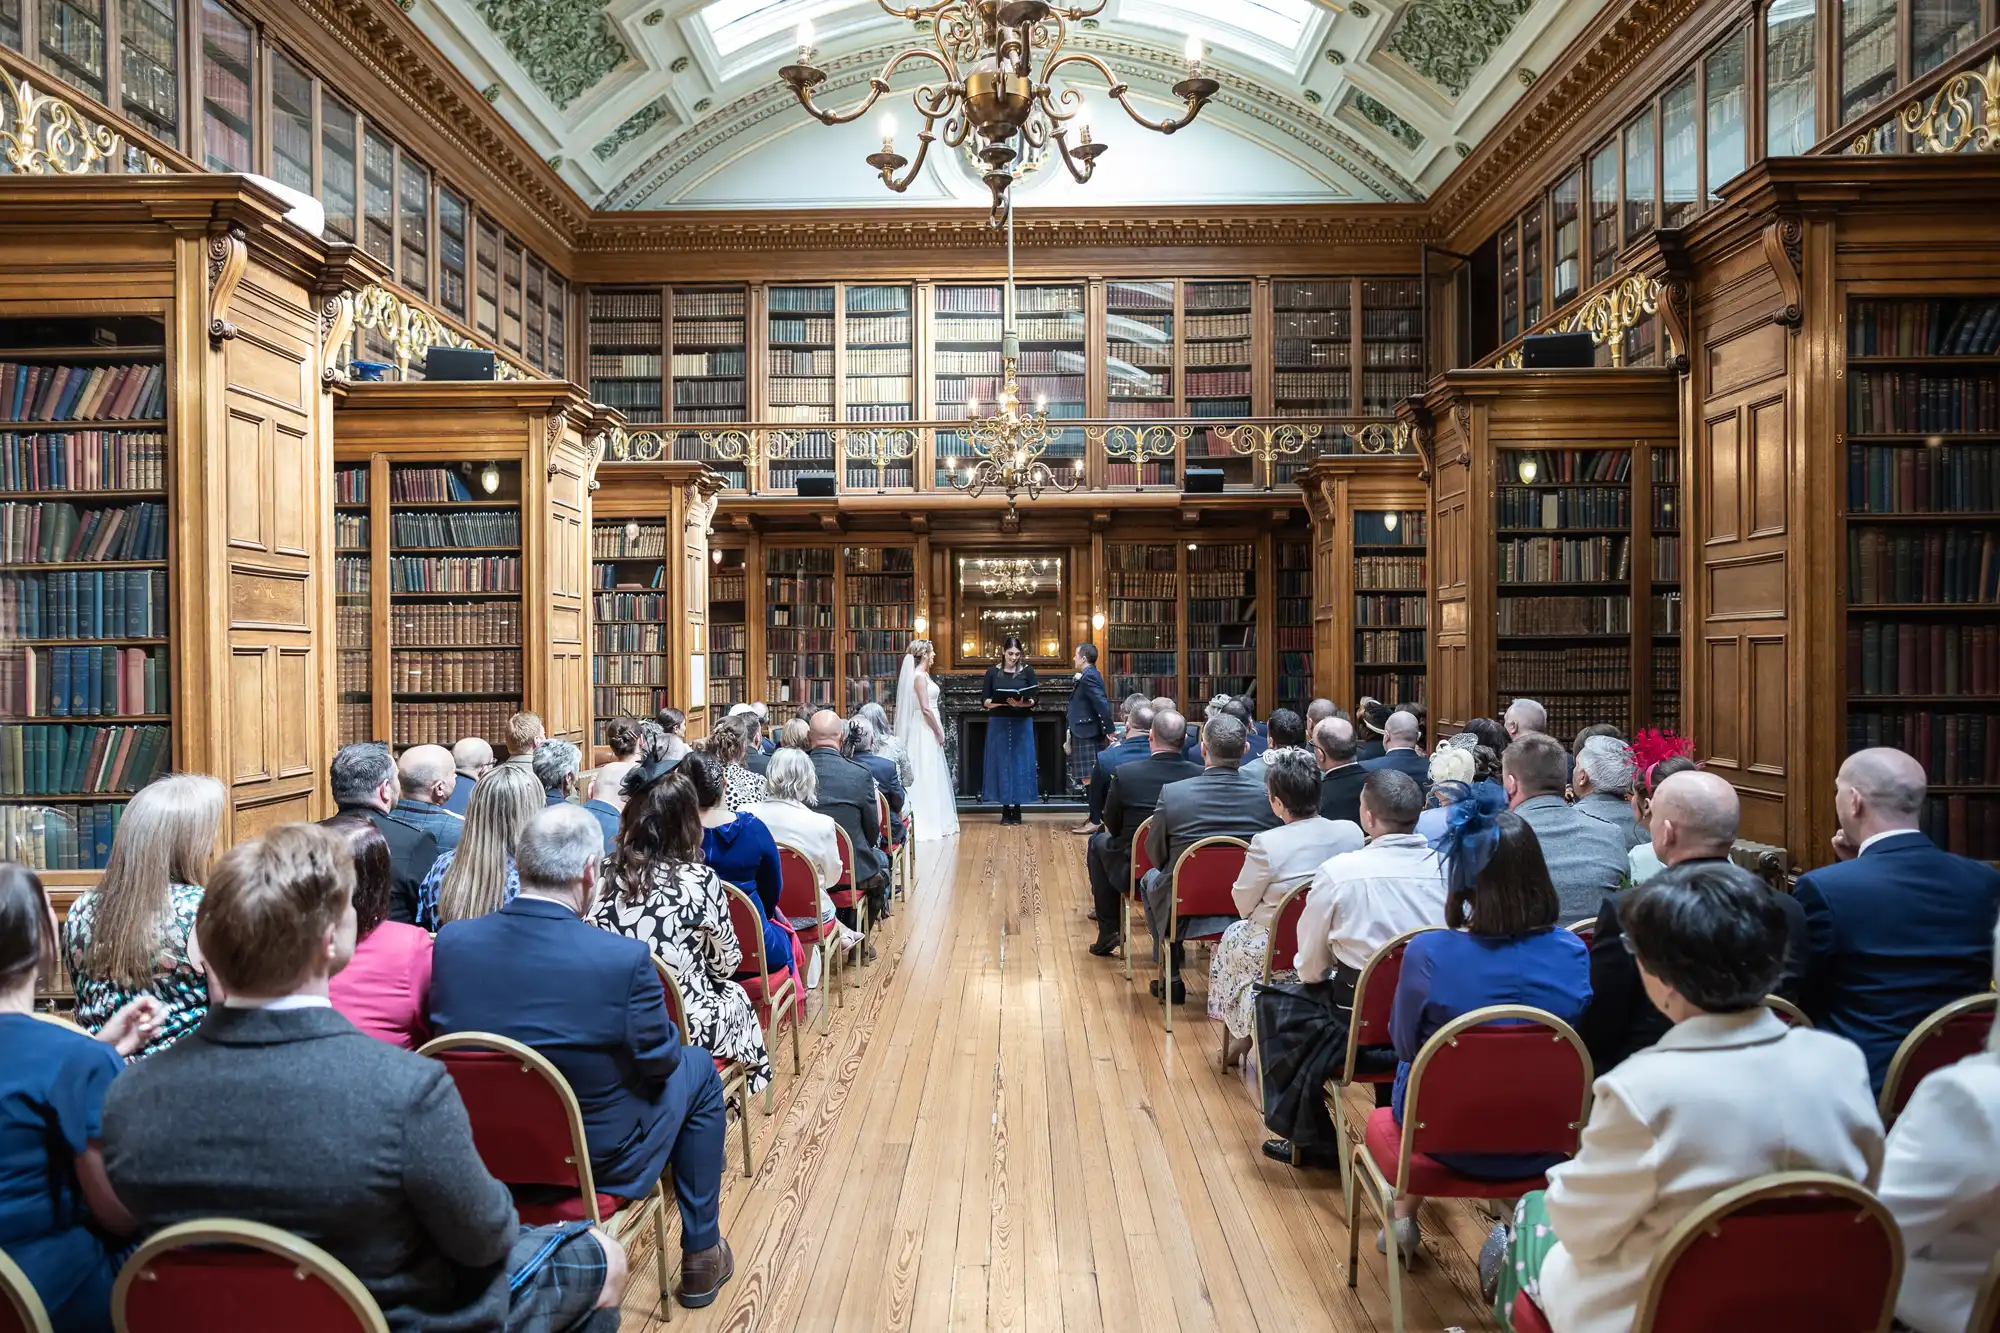 A wedding ceremony taking place in a large, ornate library with rows of seated guests and the bride and groom standing at the front.